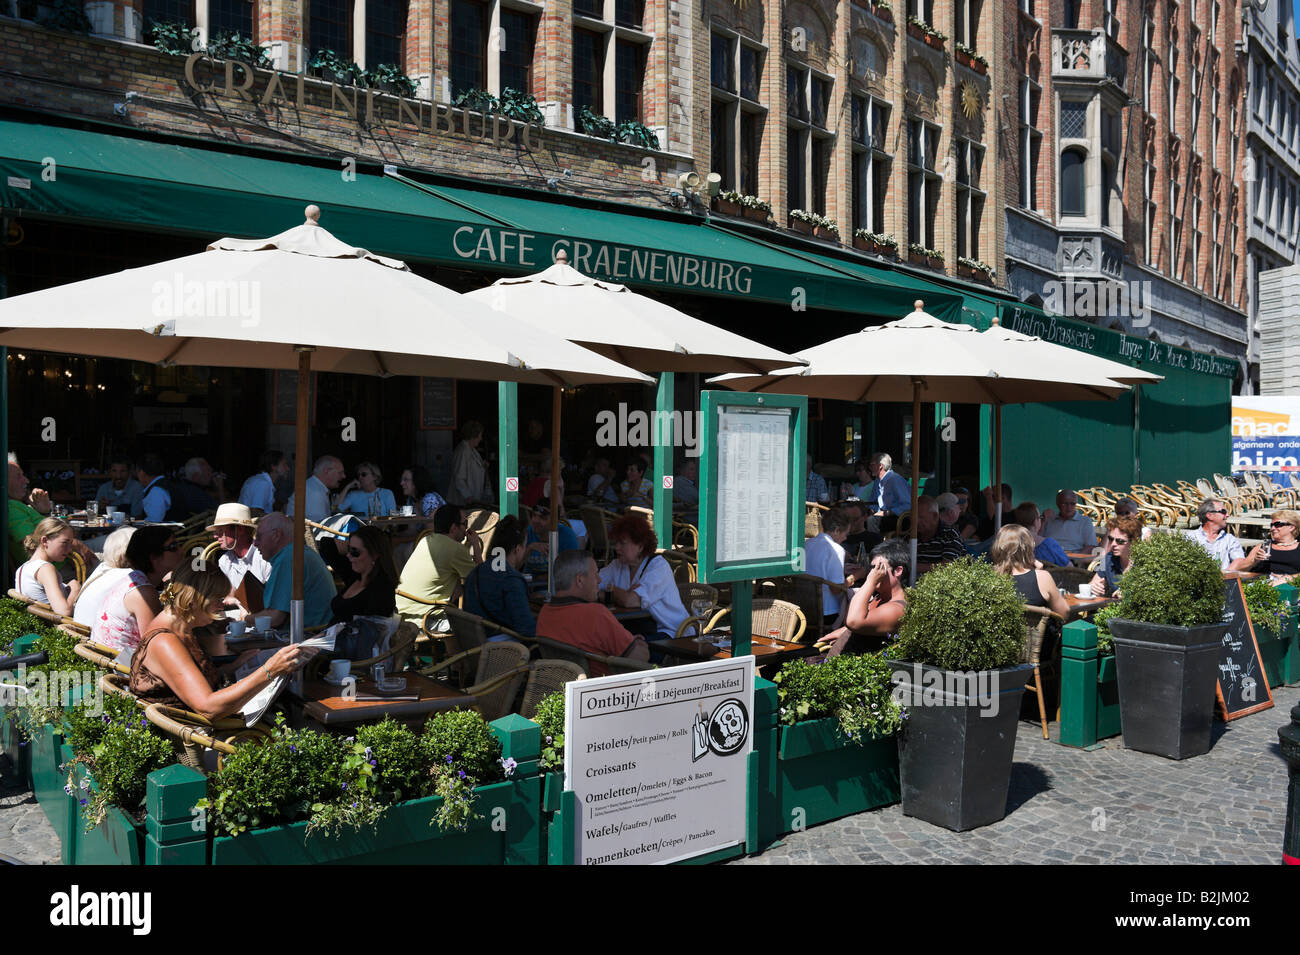 Cafe in the Grote Markt (Main Square) in the centre of the old town, Bruges, Belgium Stock Photo